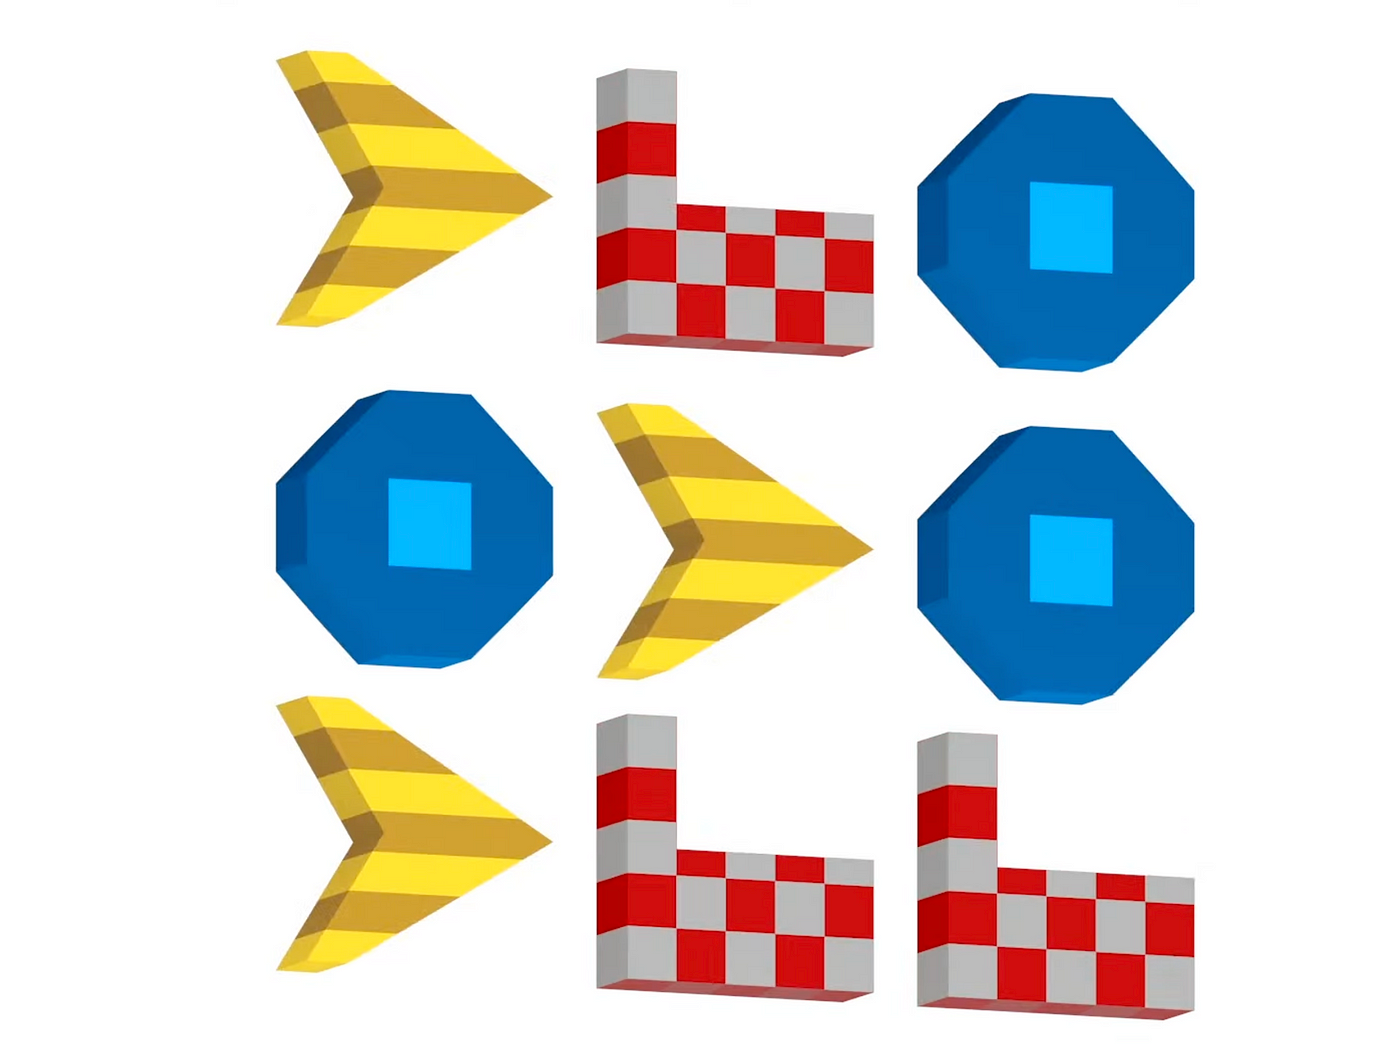 Three groups of objects placed at random. Each group with different shape, pattern and color as others.